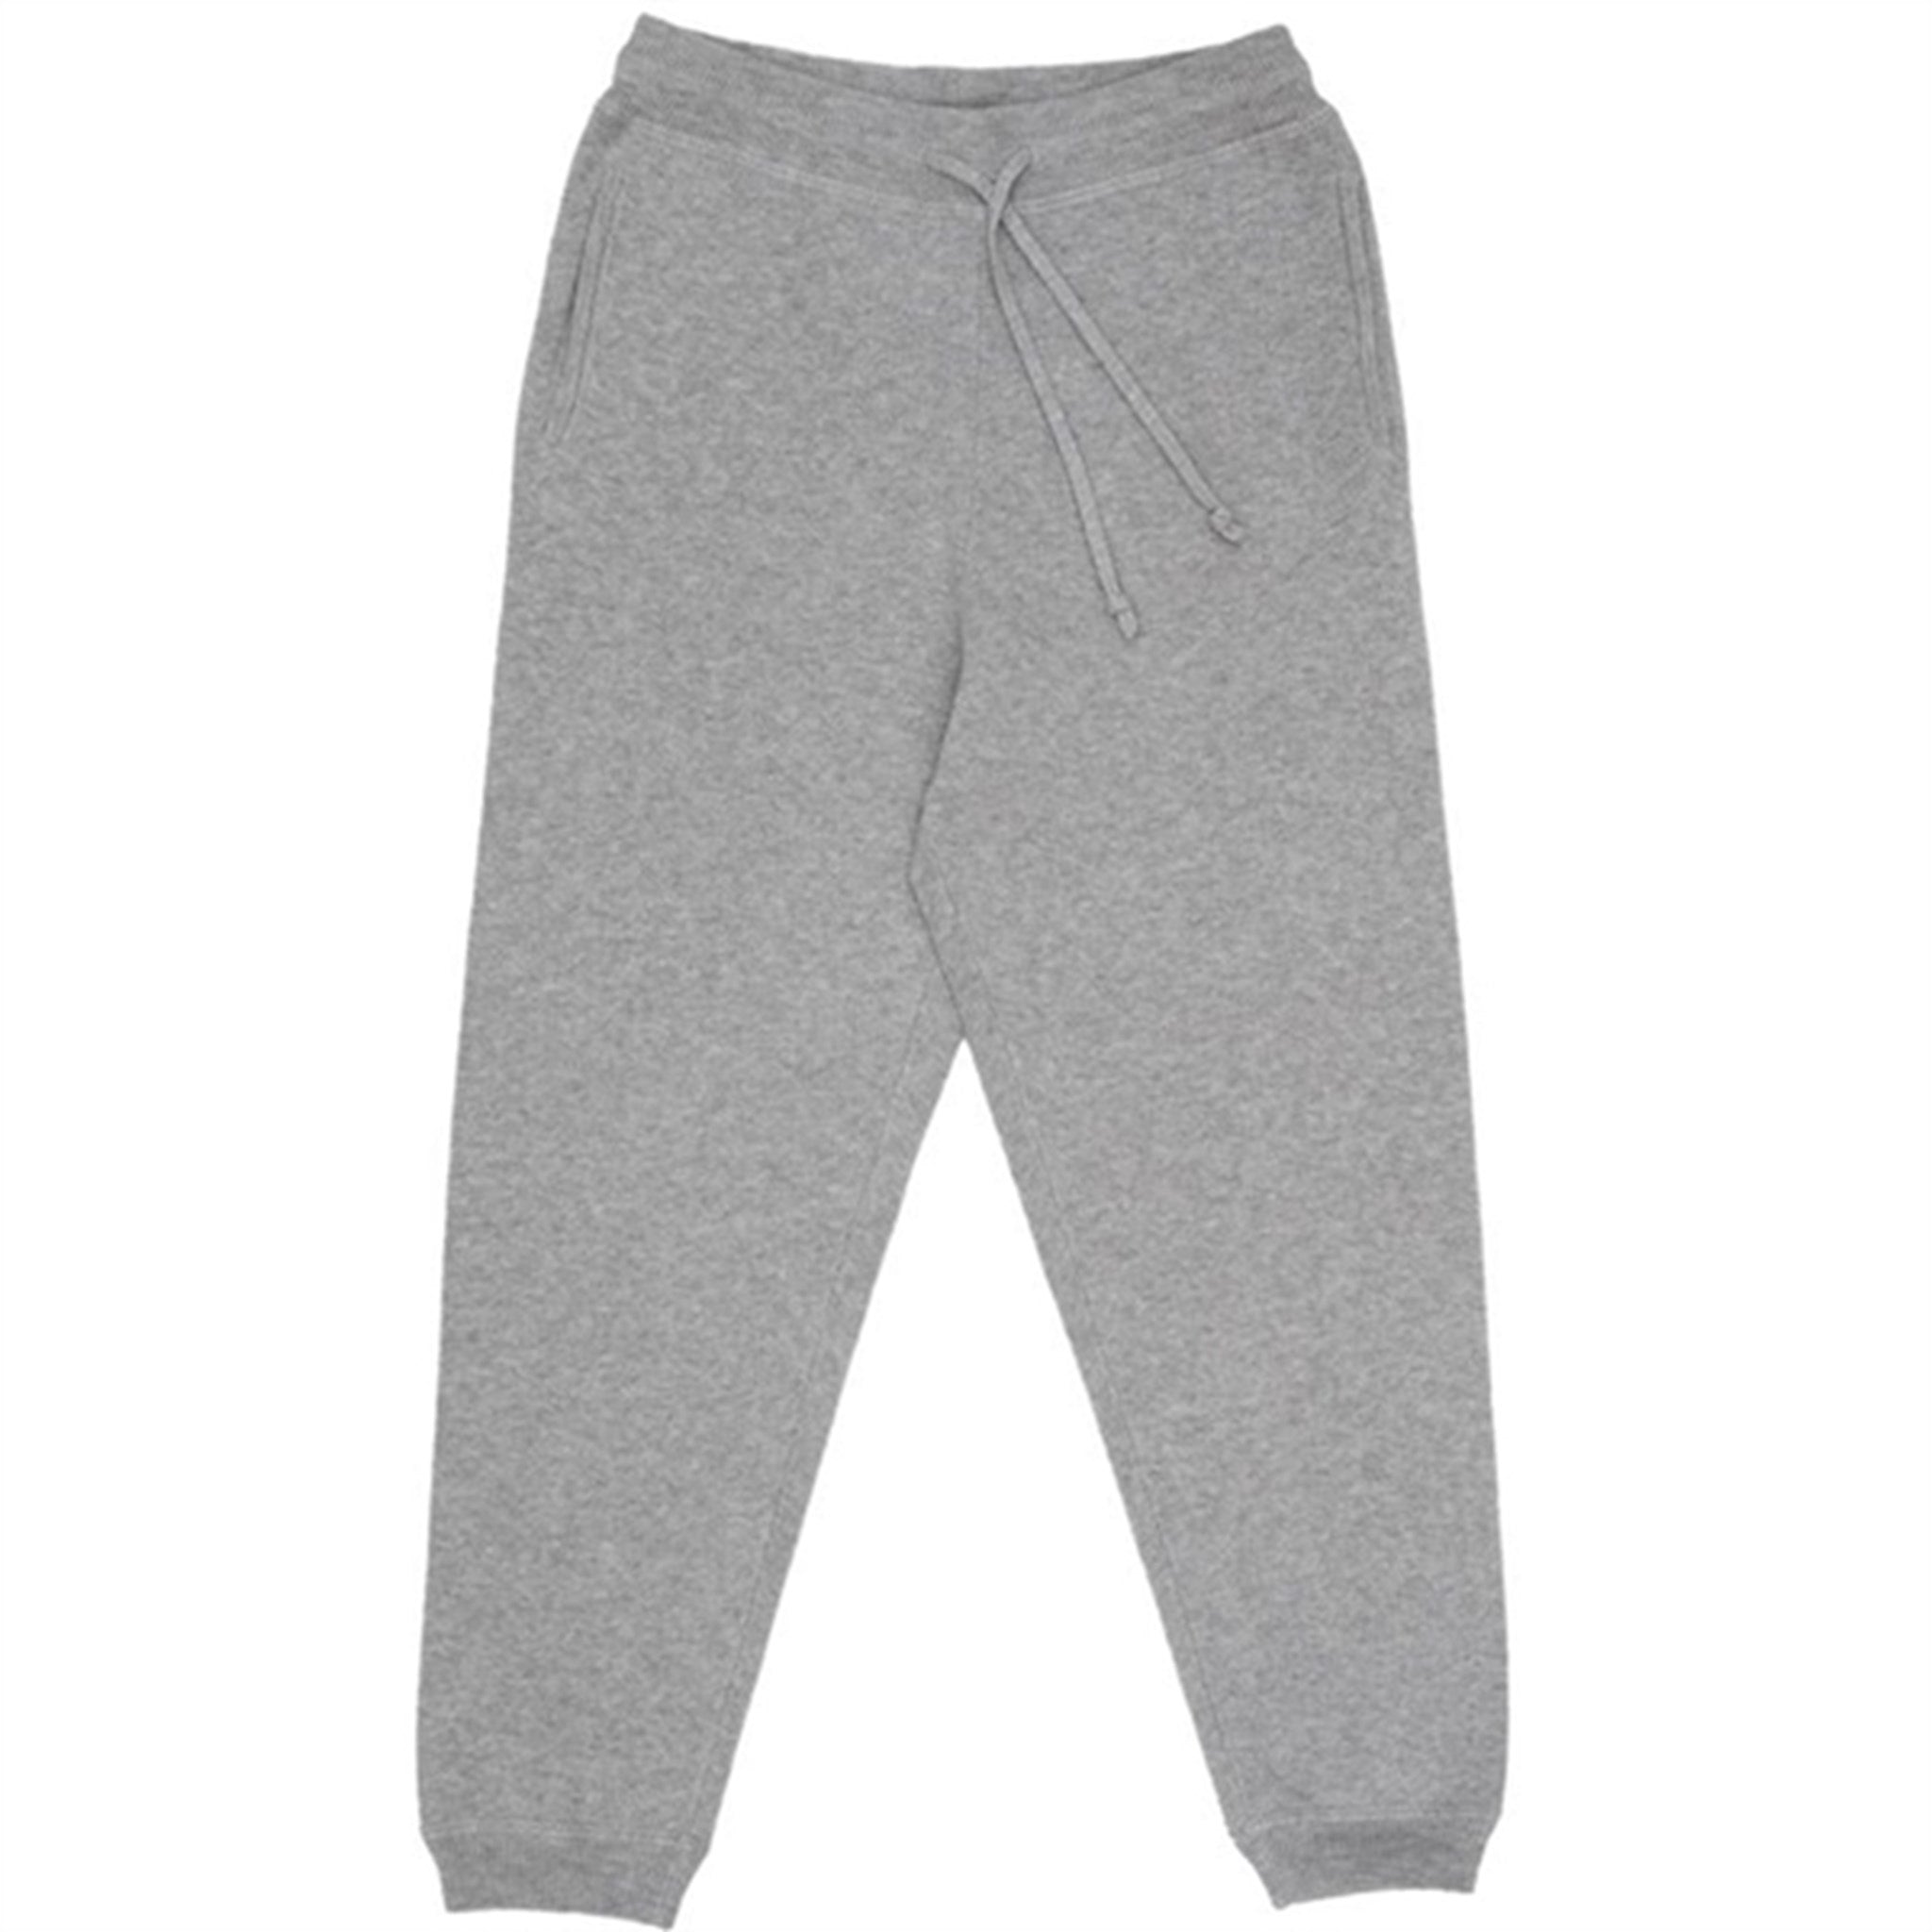 HOLMM Silver Shadow Reims Knit Pants